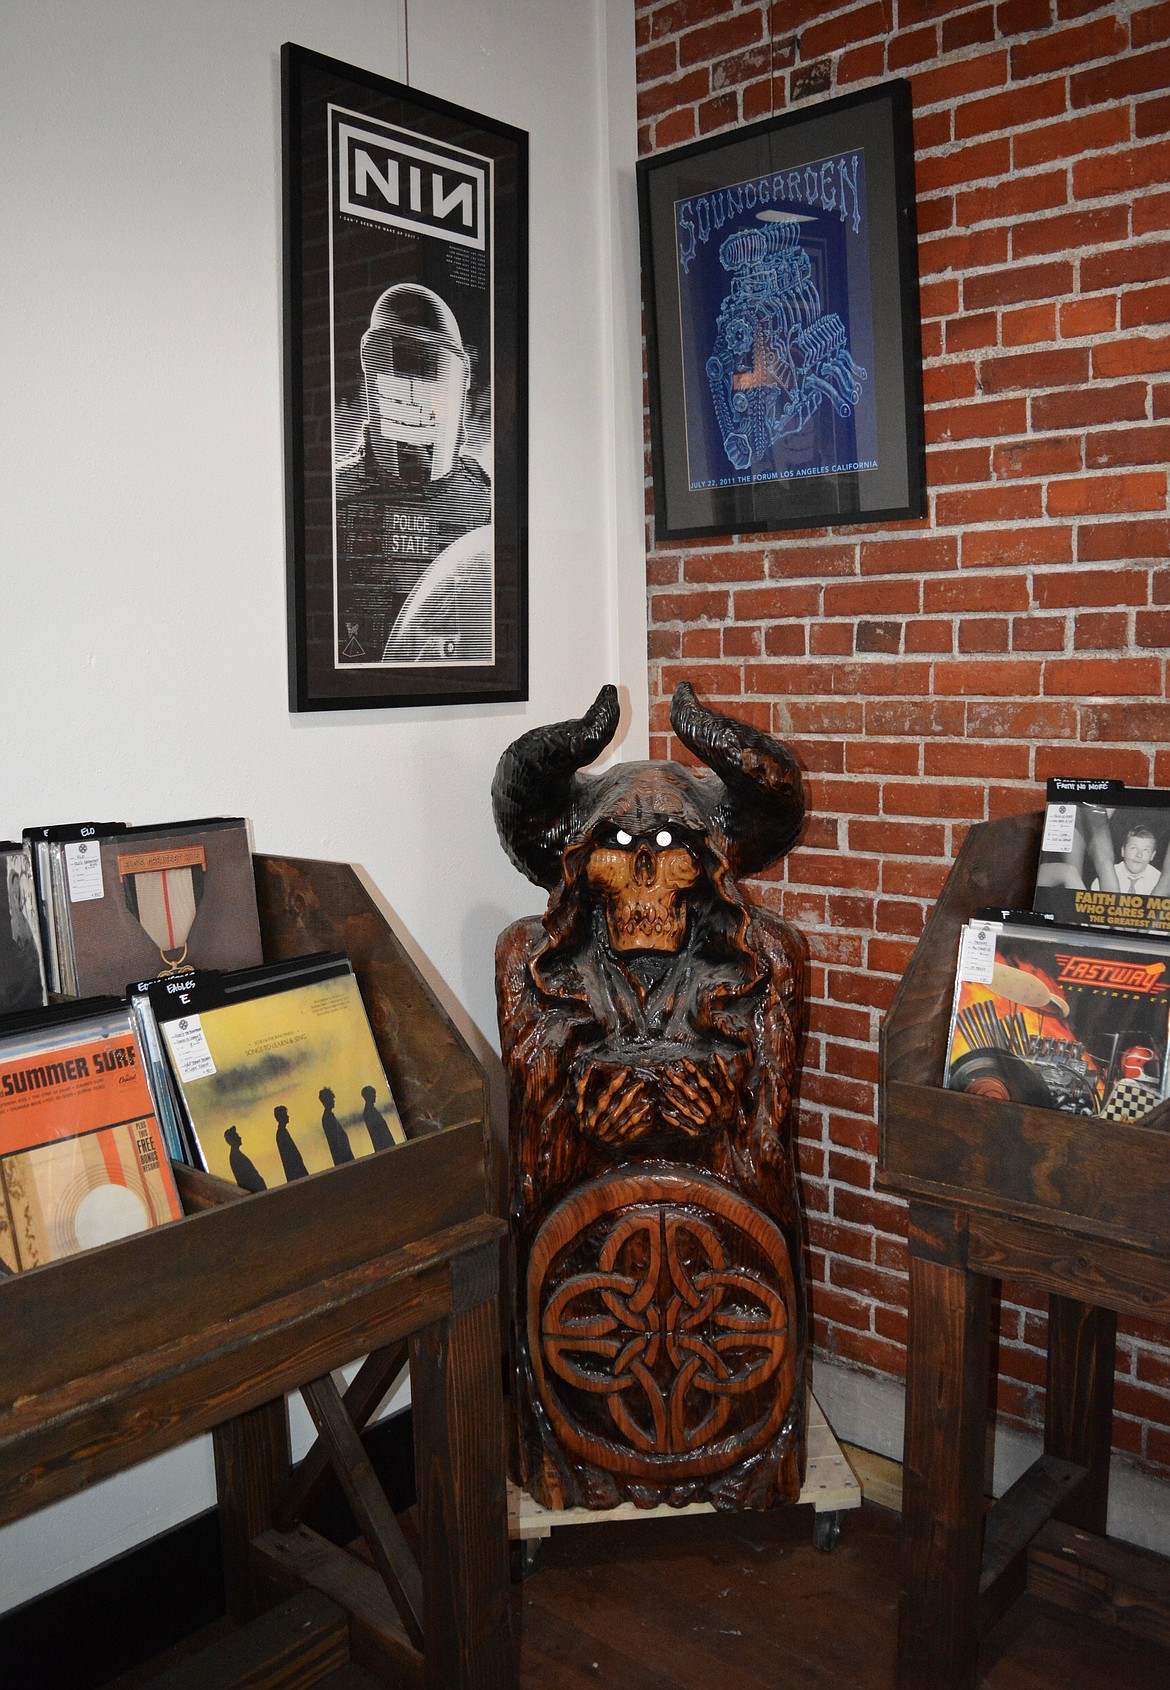 A wooden sculpture evoking the Tin Snug's logo is posted in a corner of the record store portion of the the business.